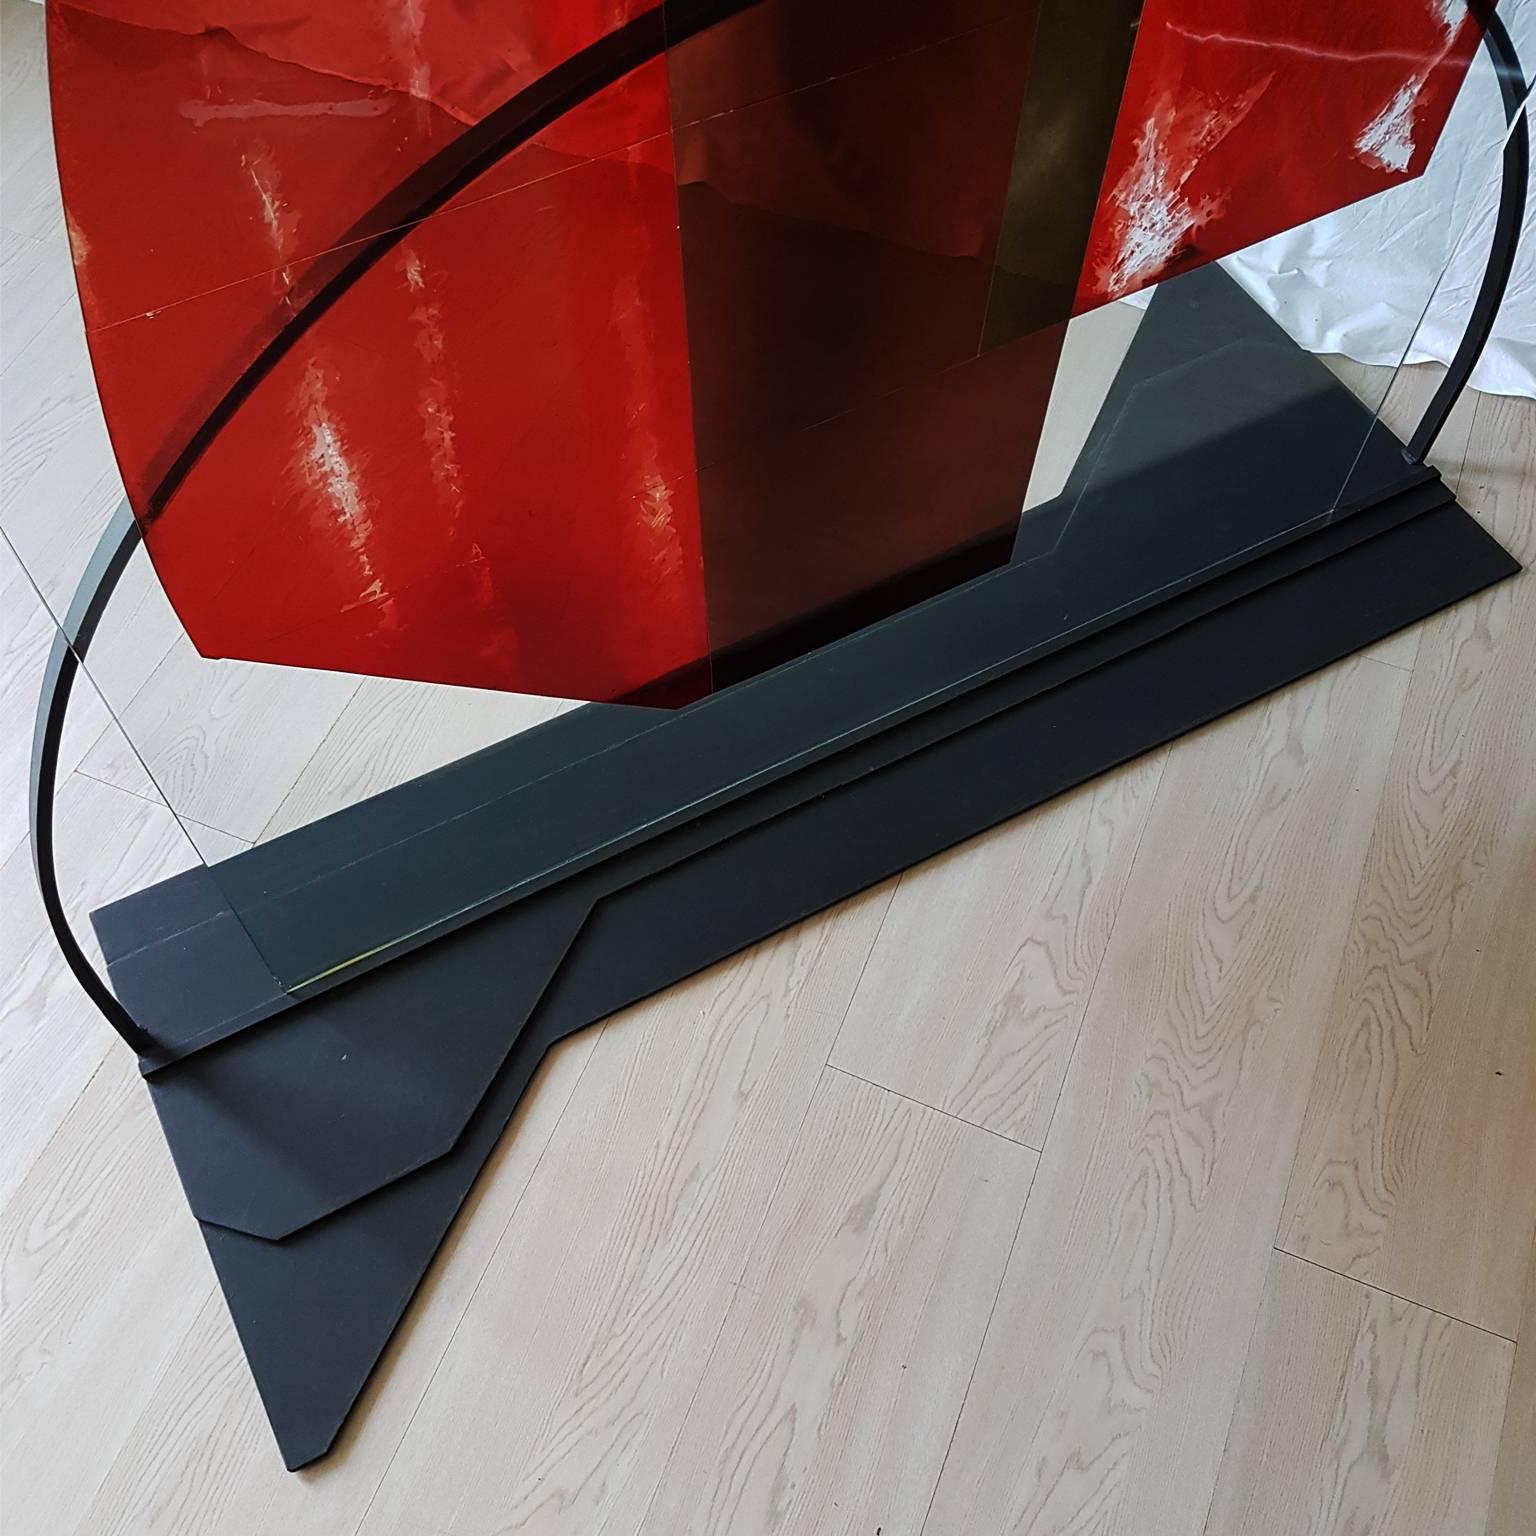 Italian Contemporary Red Etched Art Crystal Glass Sculpture with Black Iron Base In Excellent Condition For Sale In Mornico al Serio ( BG), Lombardia